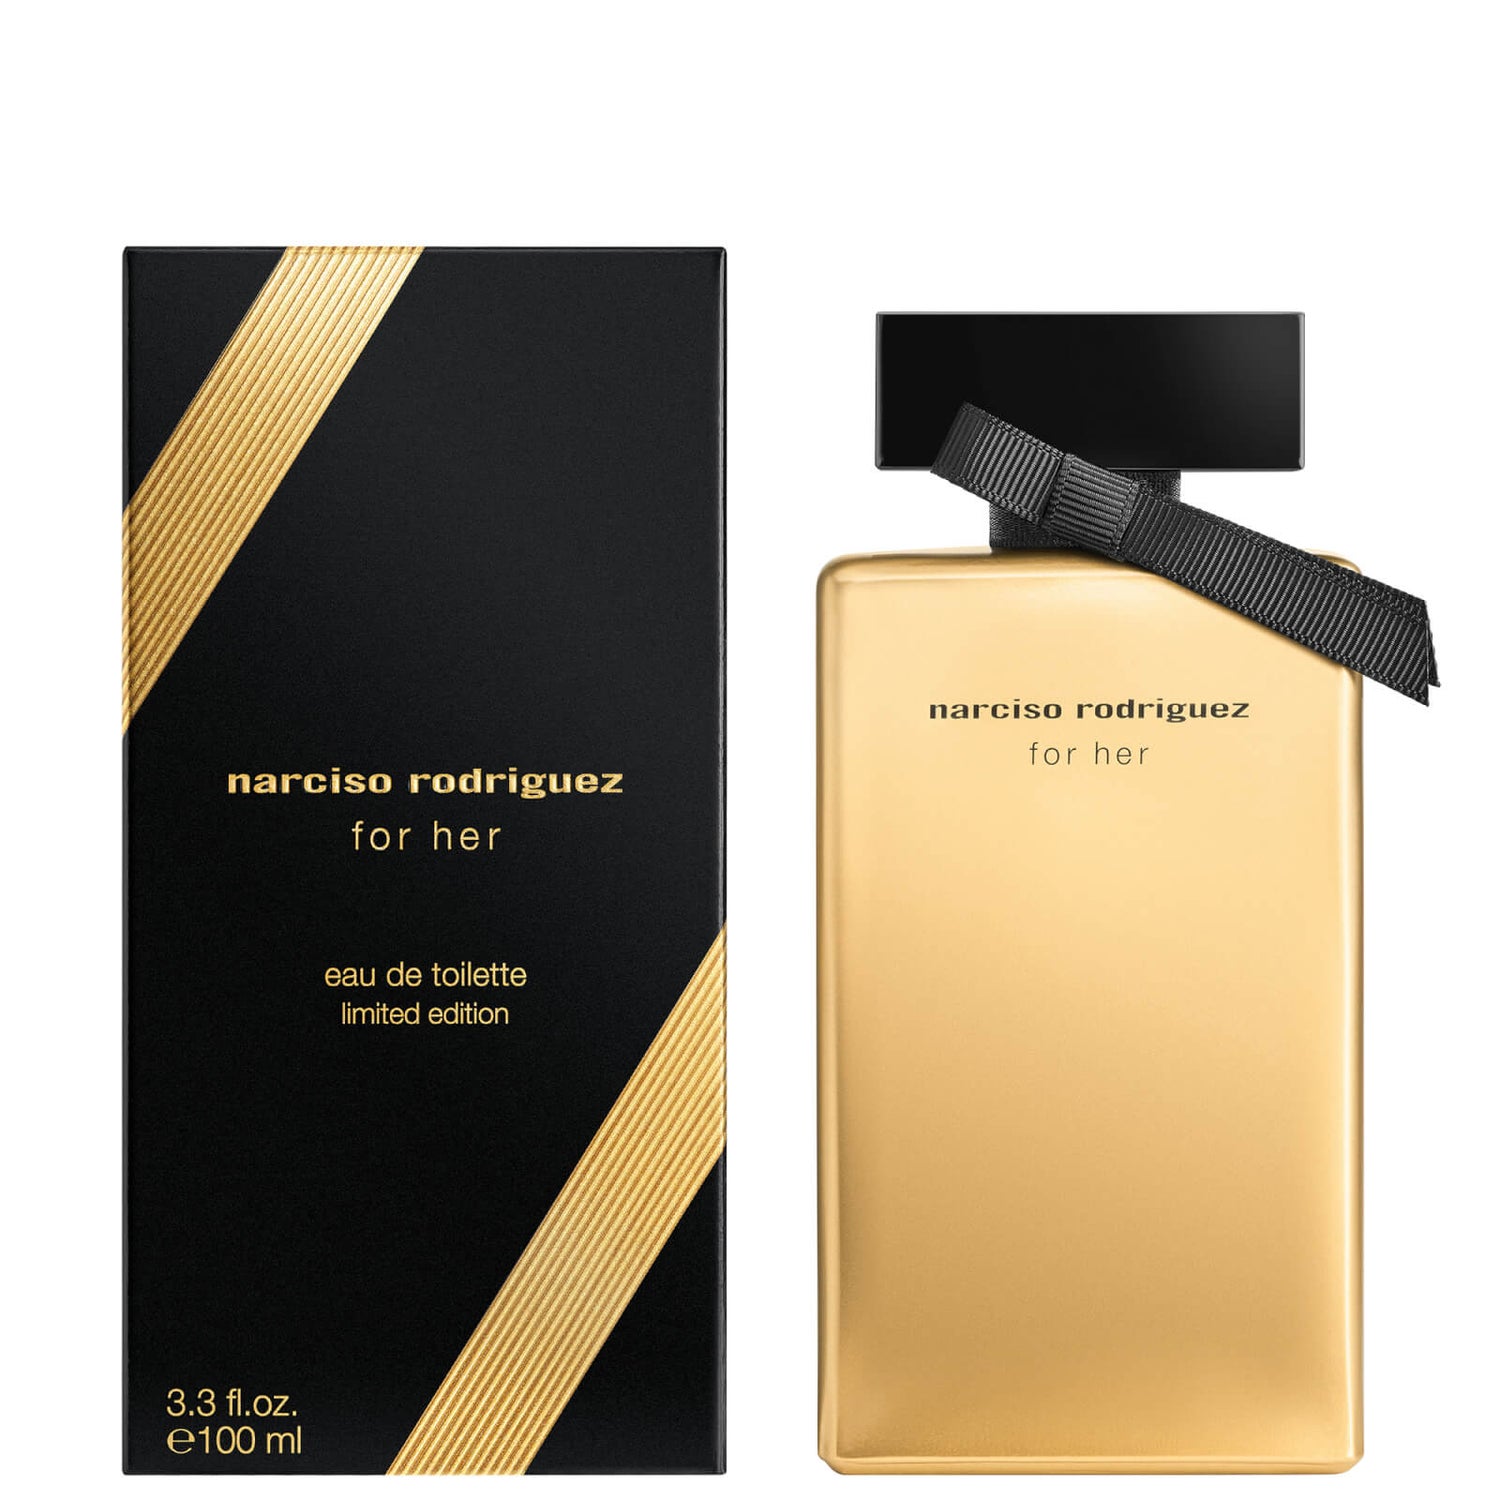 Narciso Rodriguez Exclusive For Her Eau de Toilette Limited Edition 100ml